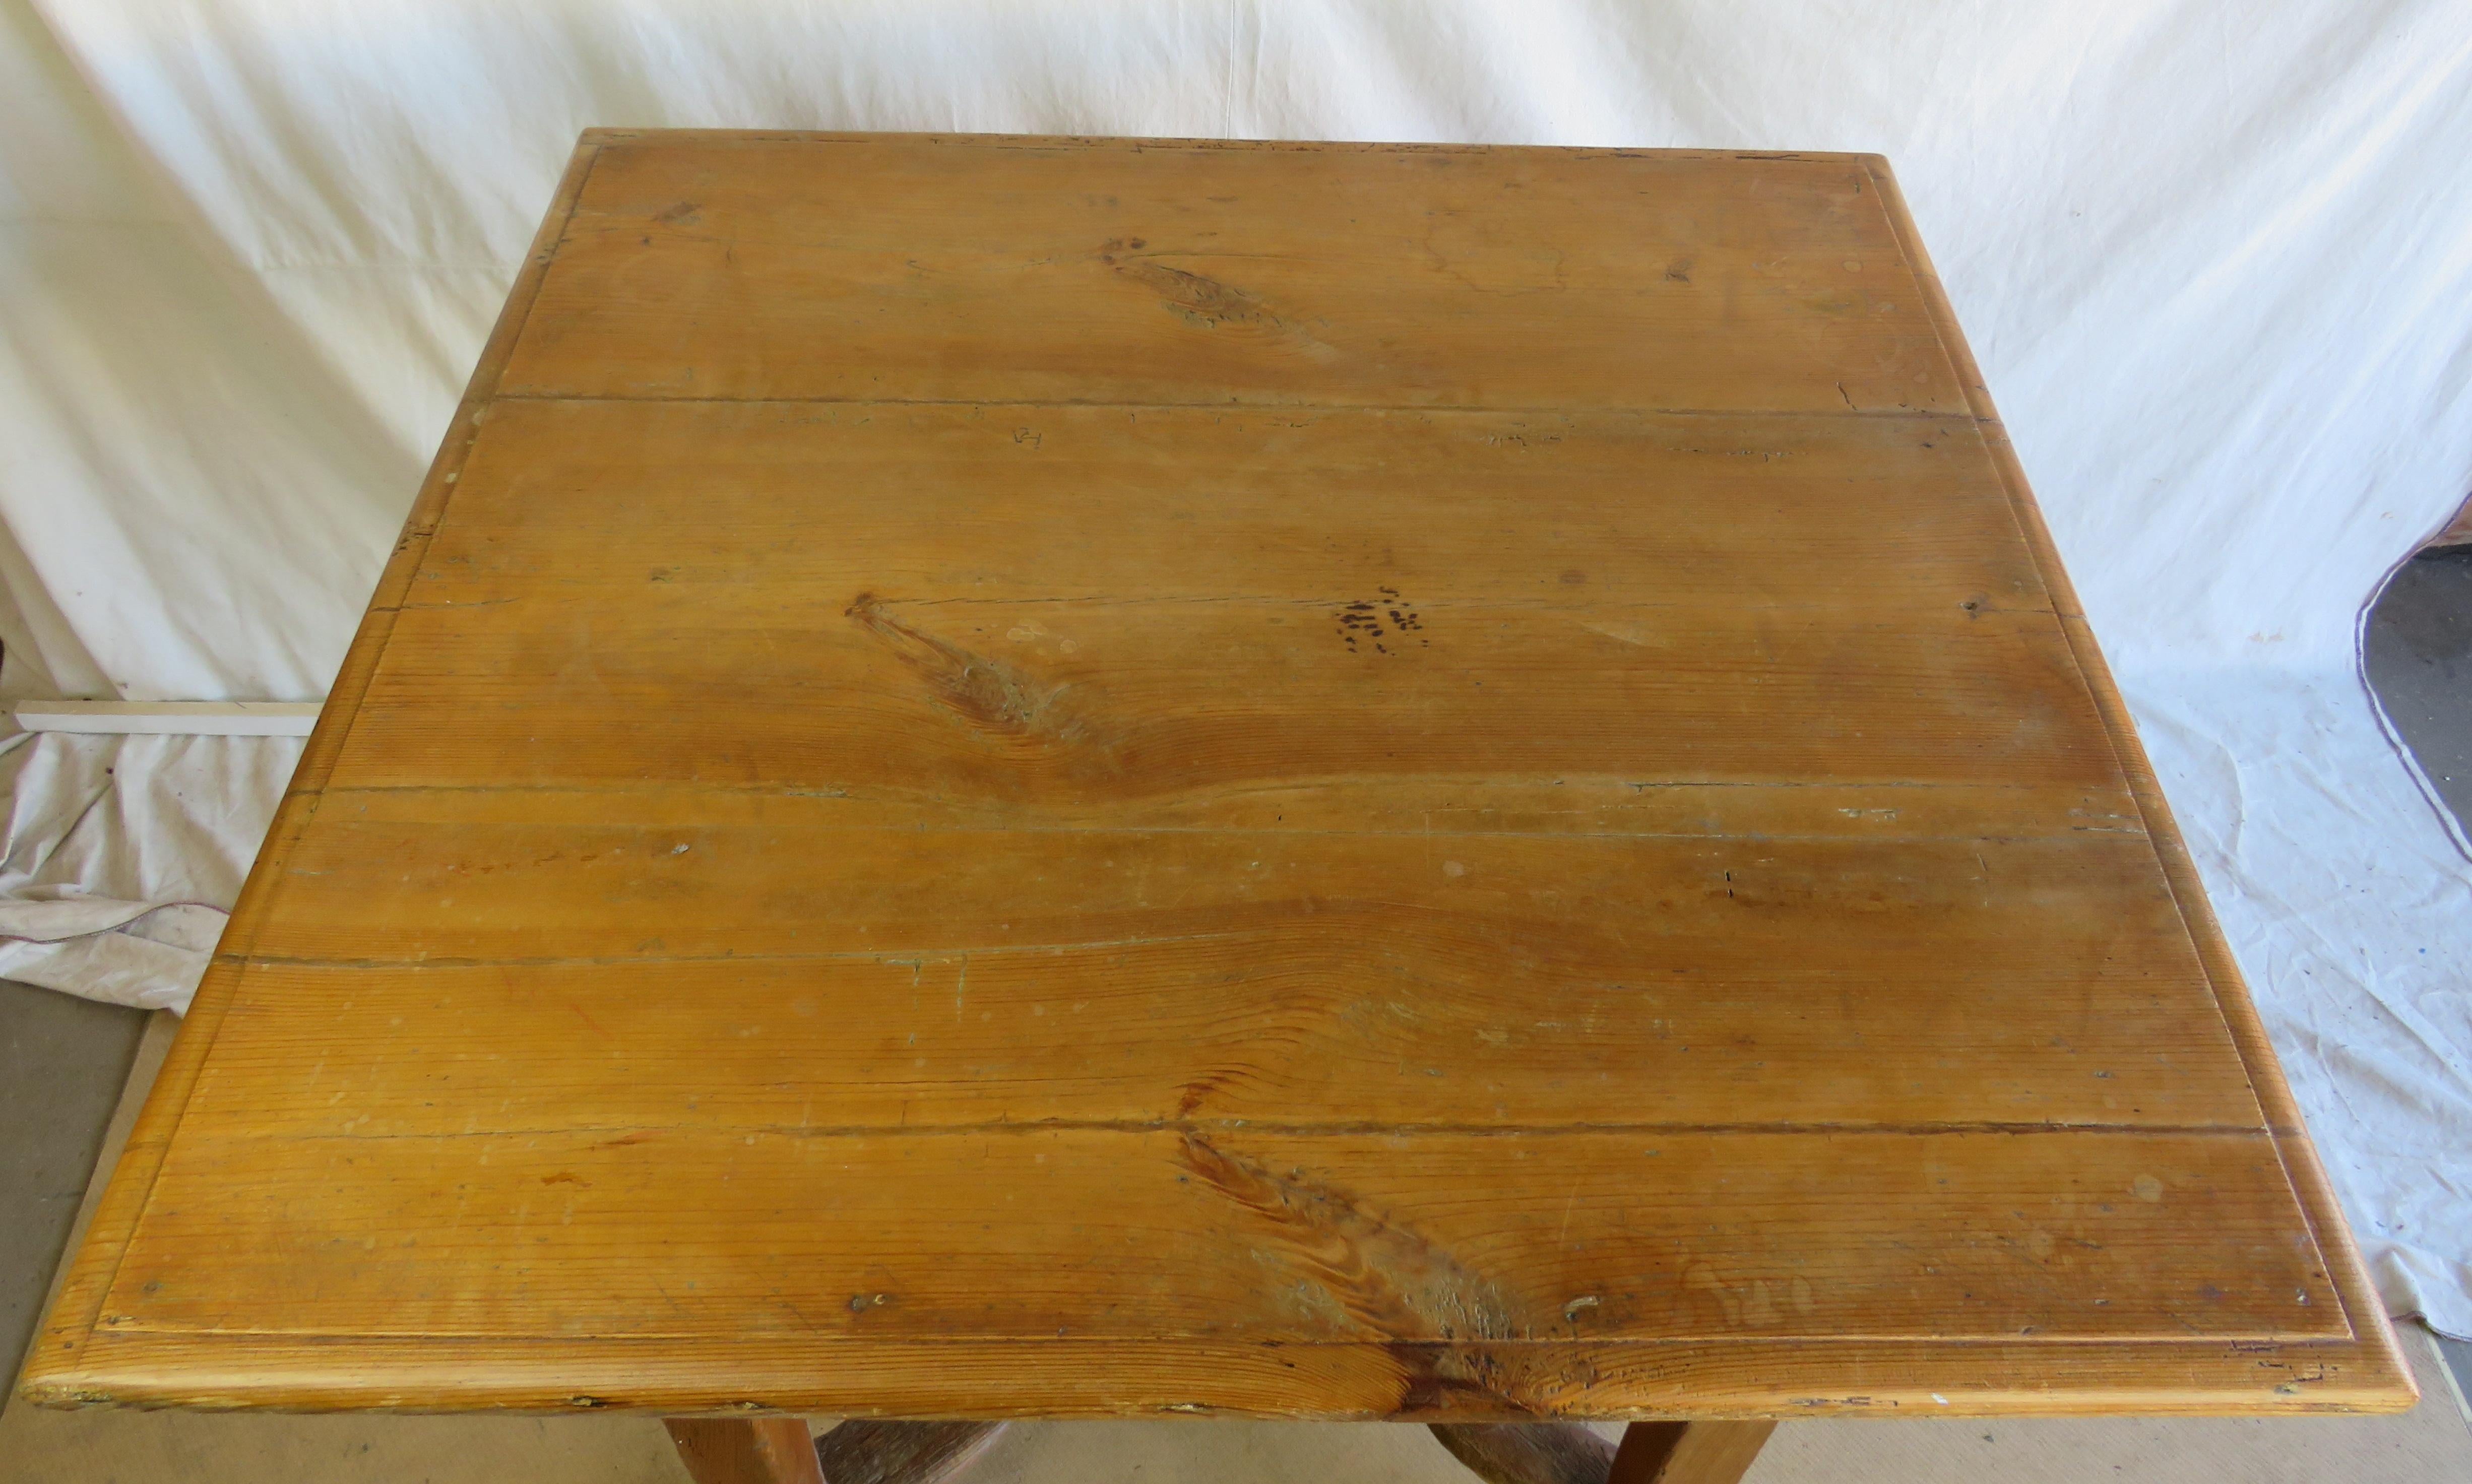 19th century Oak card table, with lift-off top, single drawer, and interesting wavy x-stretcher.